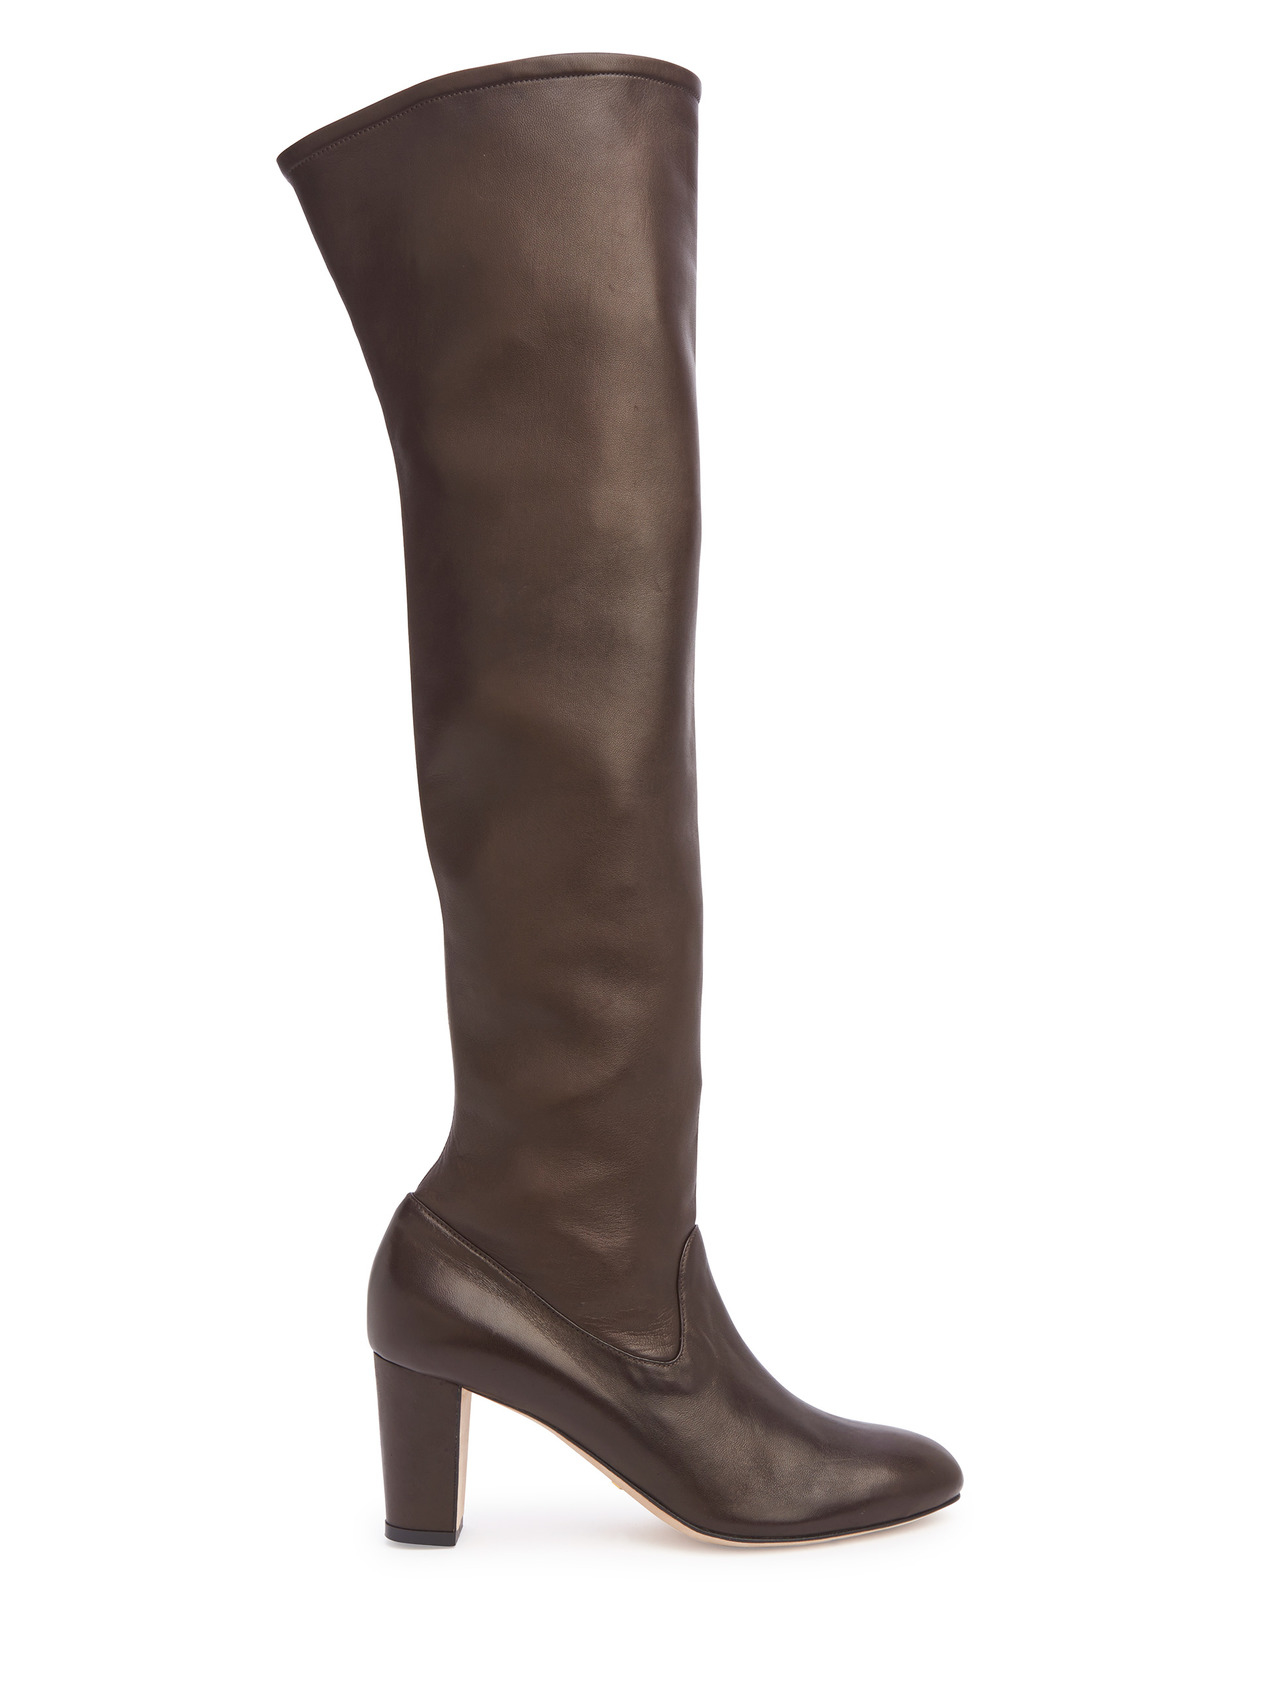 MAIYET Women's Vivien Stretch Over the Knee Leather Boots $1,295 NEW | eBay